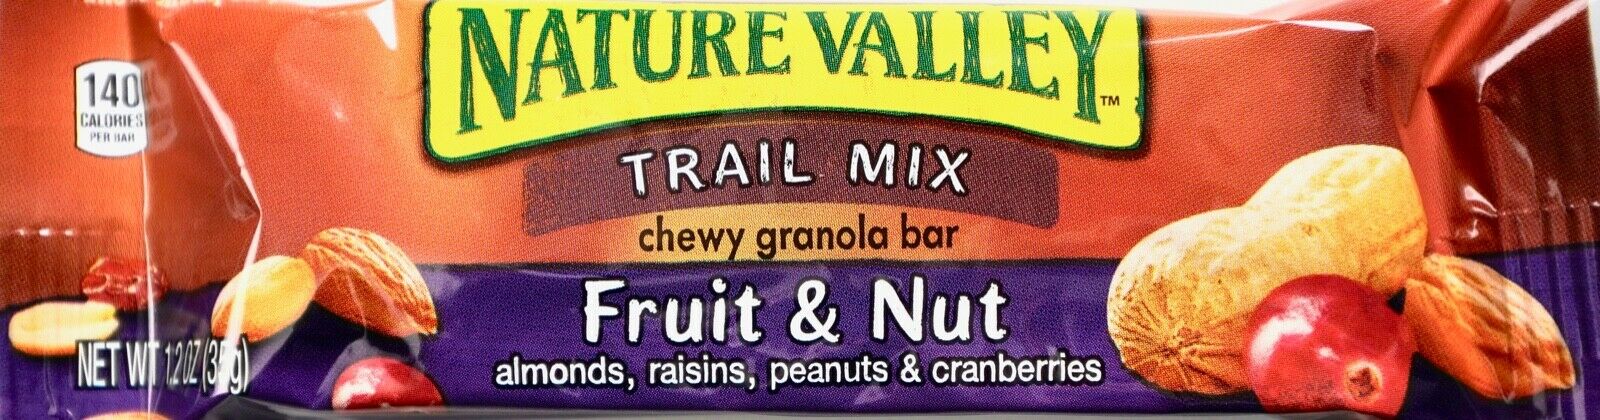 Nature Valley Fruit & Nut Chewy Granola Bars Trail Mix Fiber, 1.2 Ounce Bars